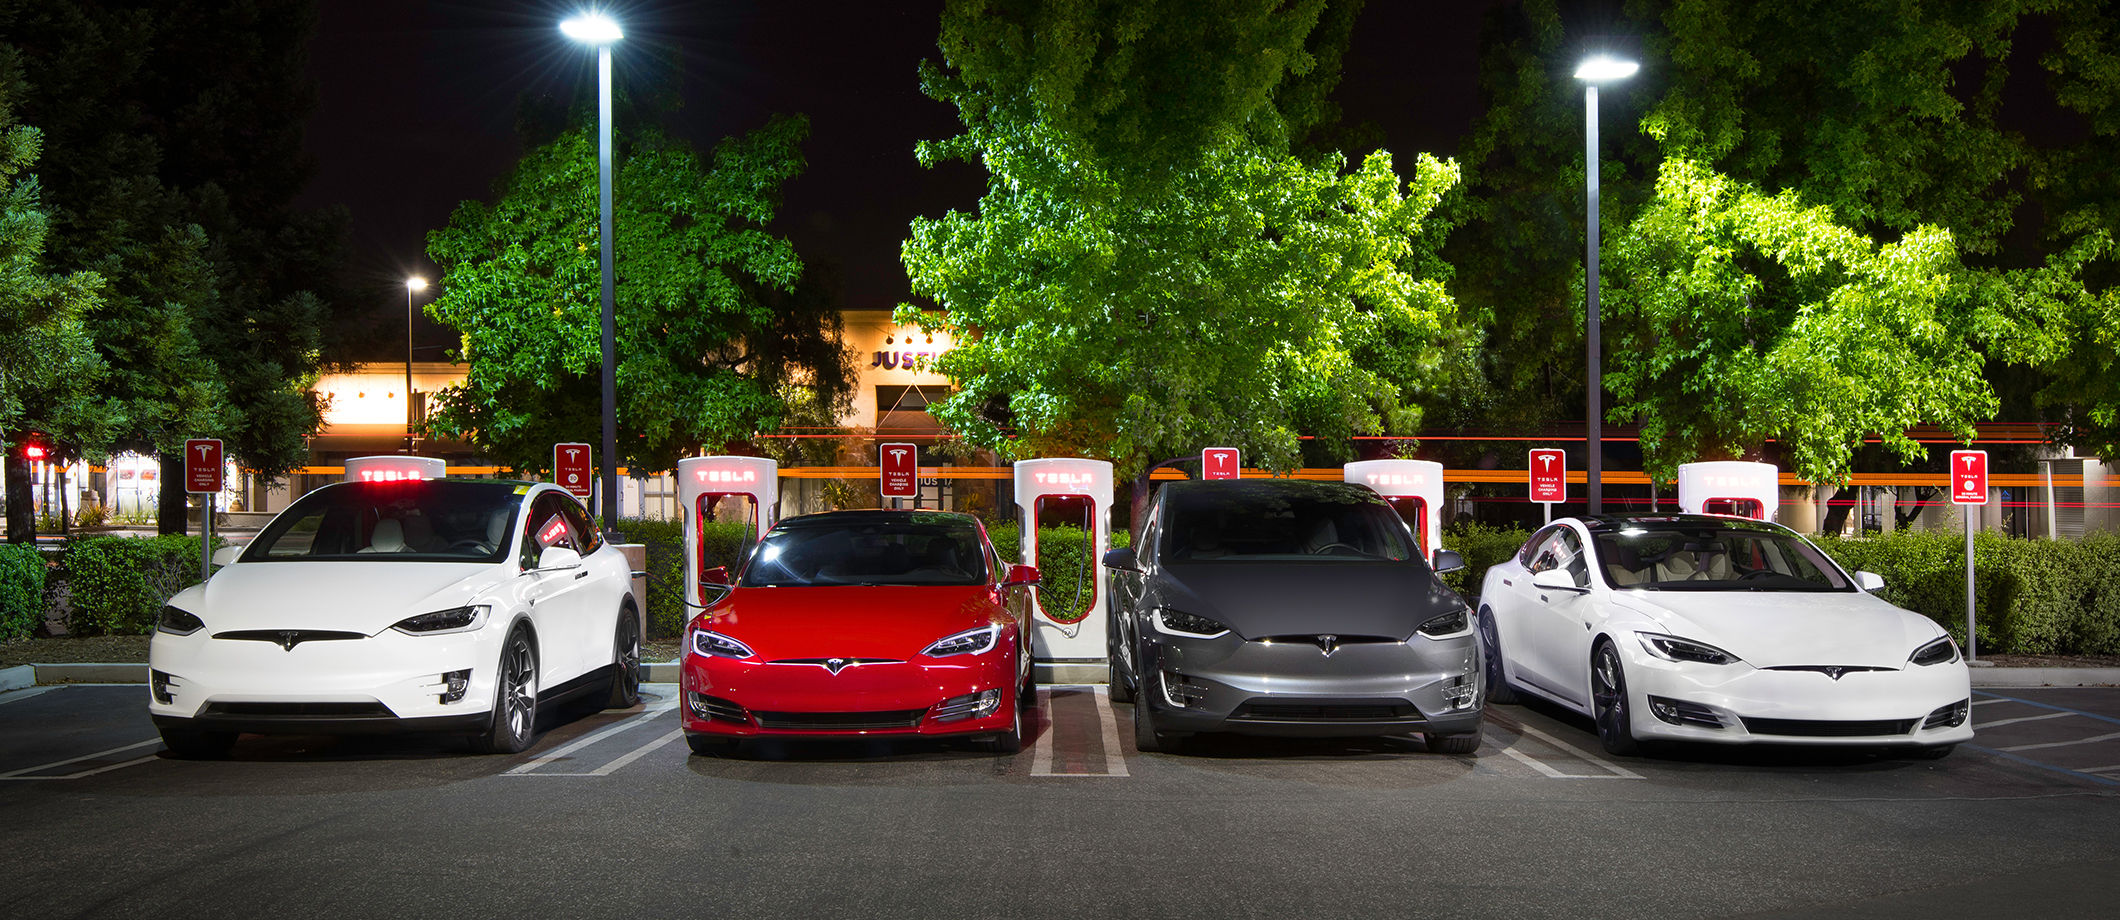 New York's new 2,000 EV incentive is aimed at Tesla Model 3, Chevy